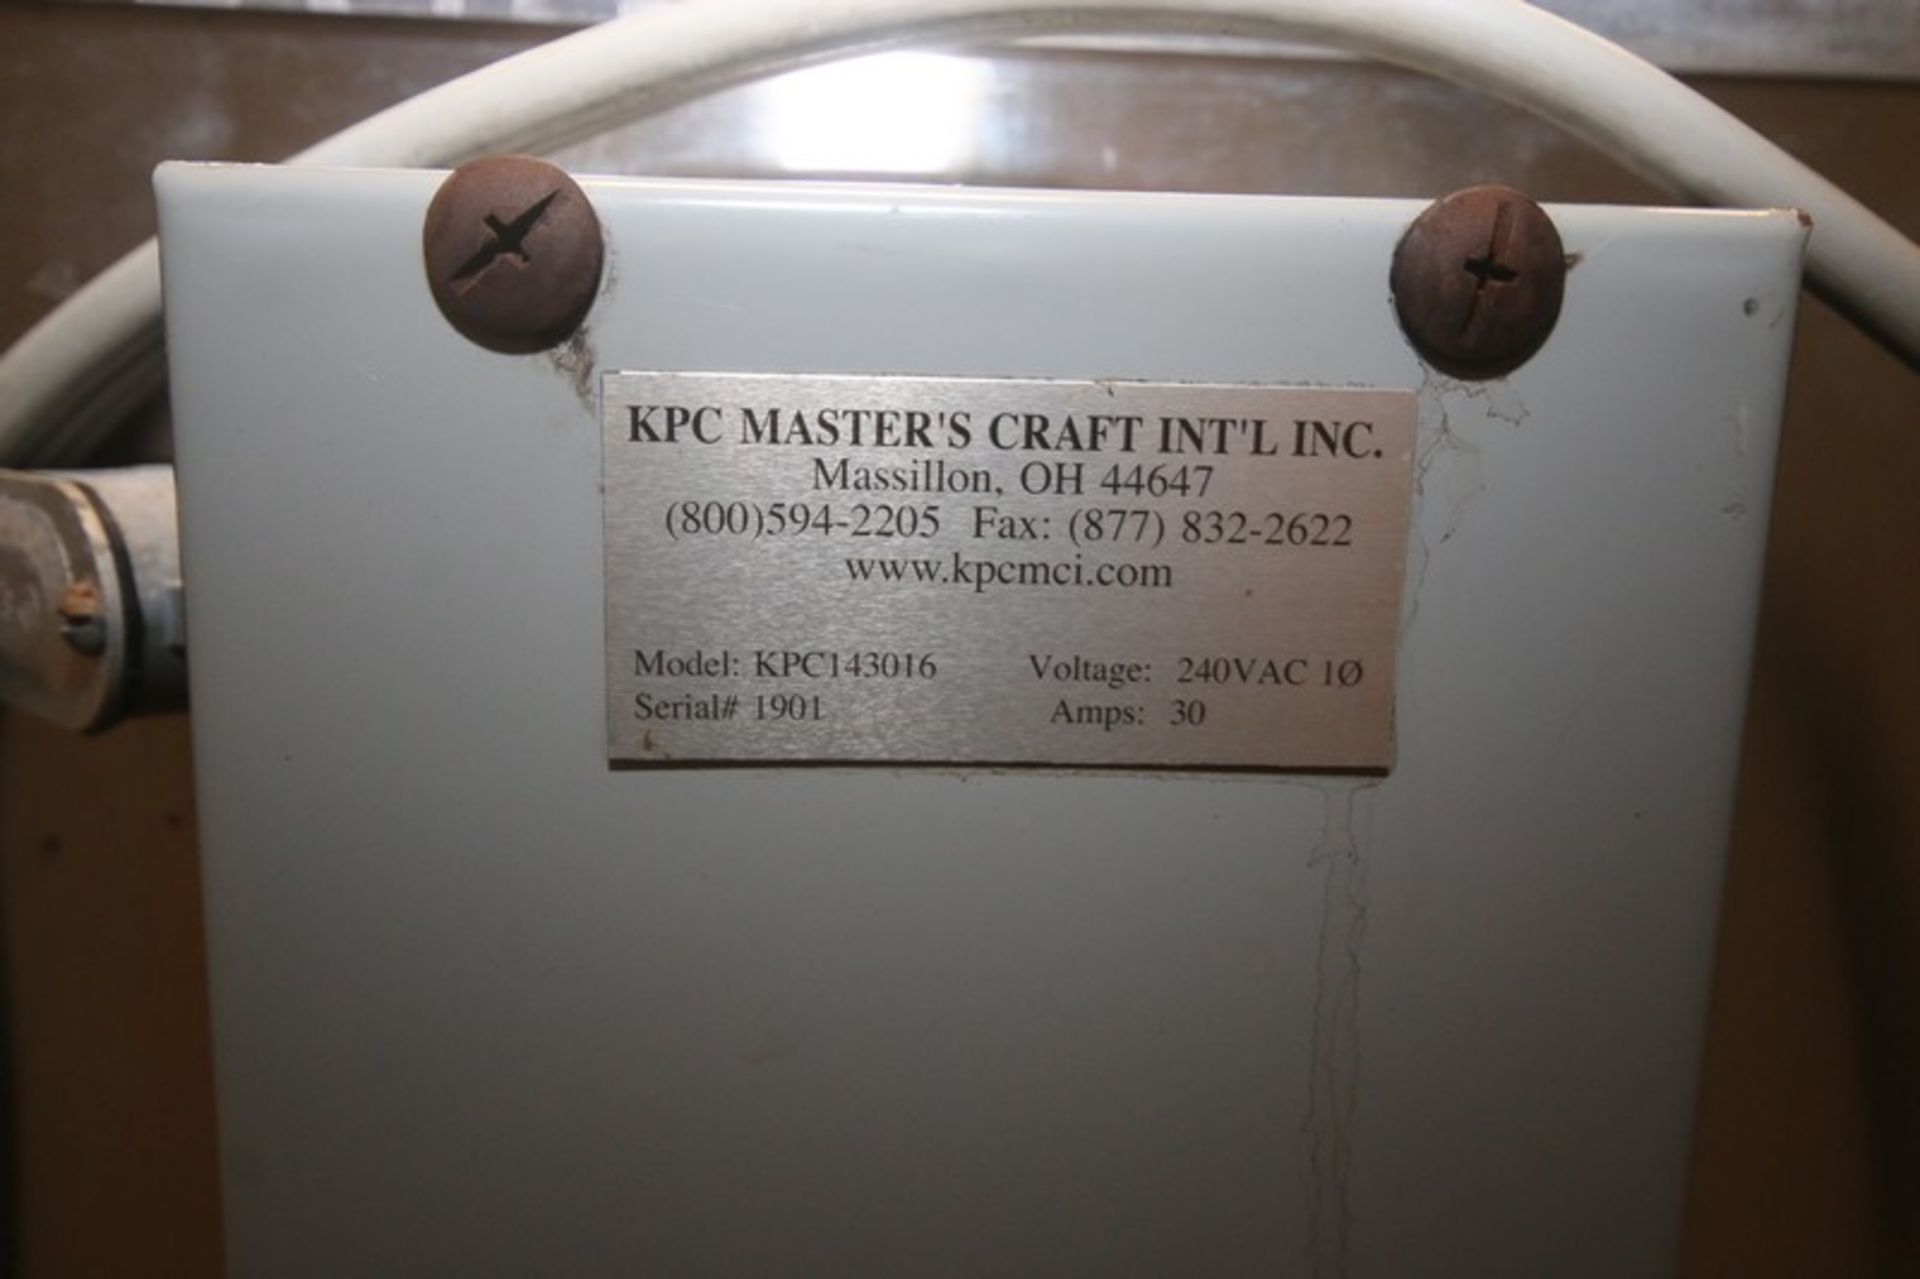 KPC Master's Craft Int'l Inc. S/S Shrink Tunnel, KPC Master's Craft Int'l Inc. S/S Shrink Tunnel, - Image 5 of 9